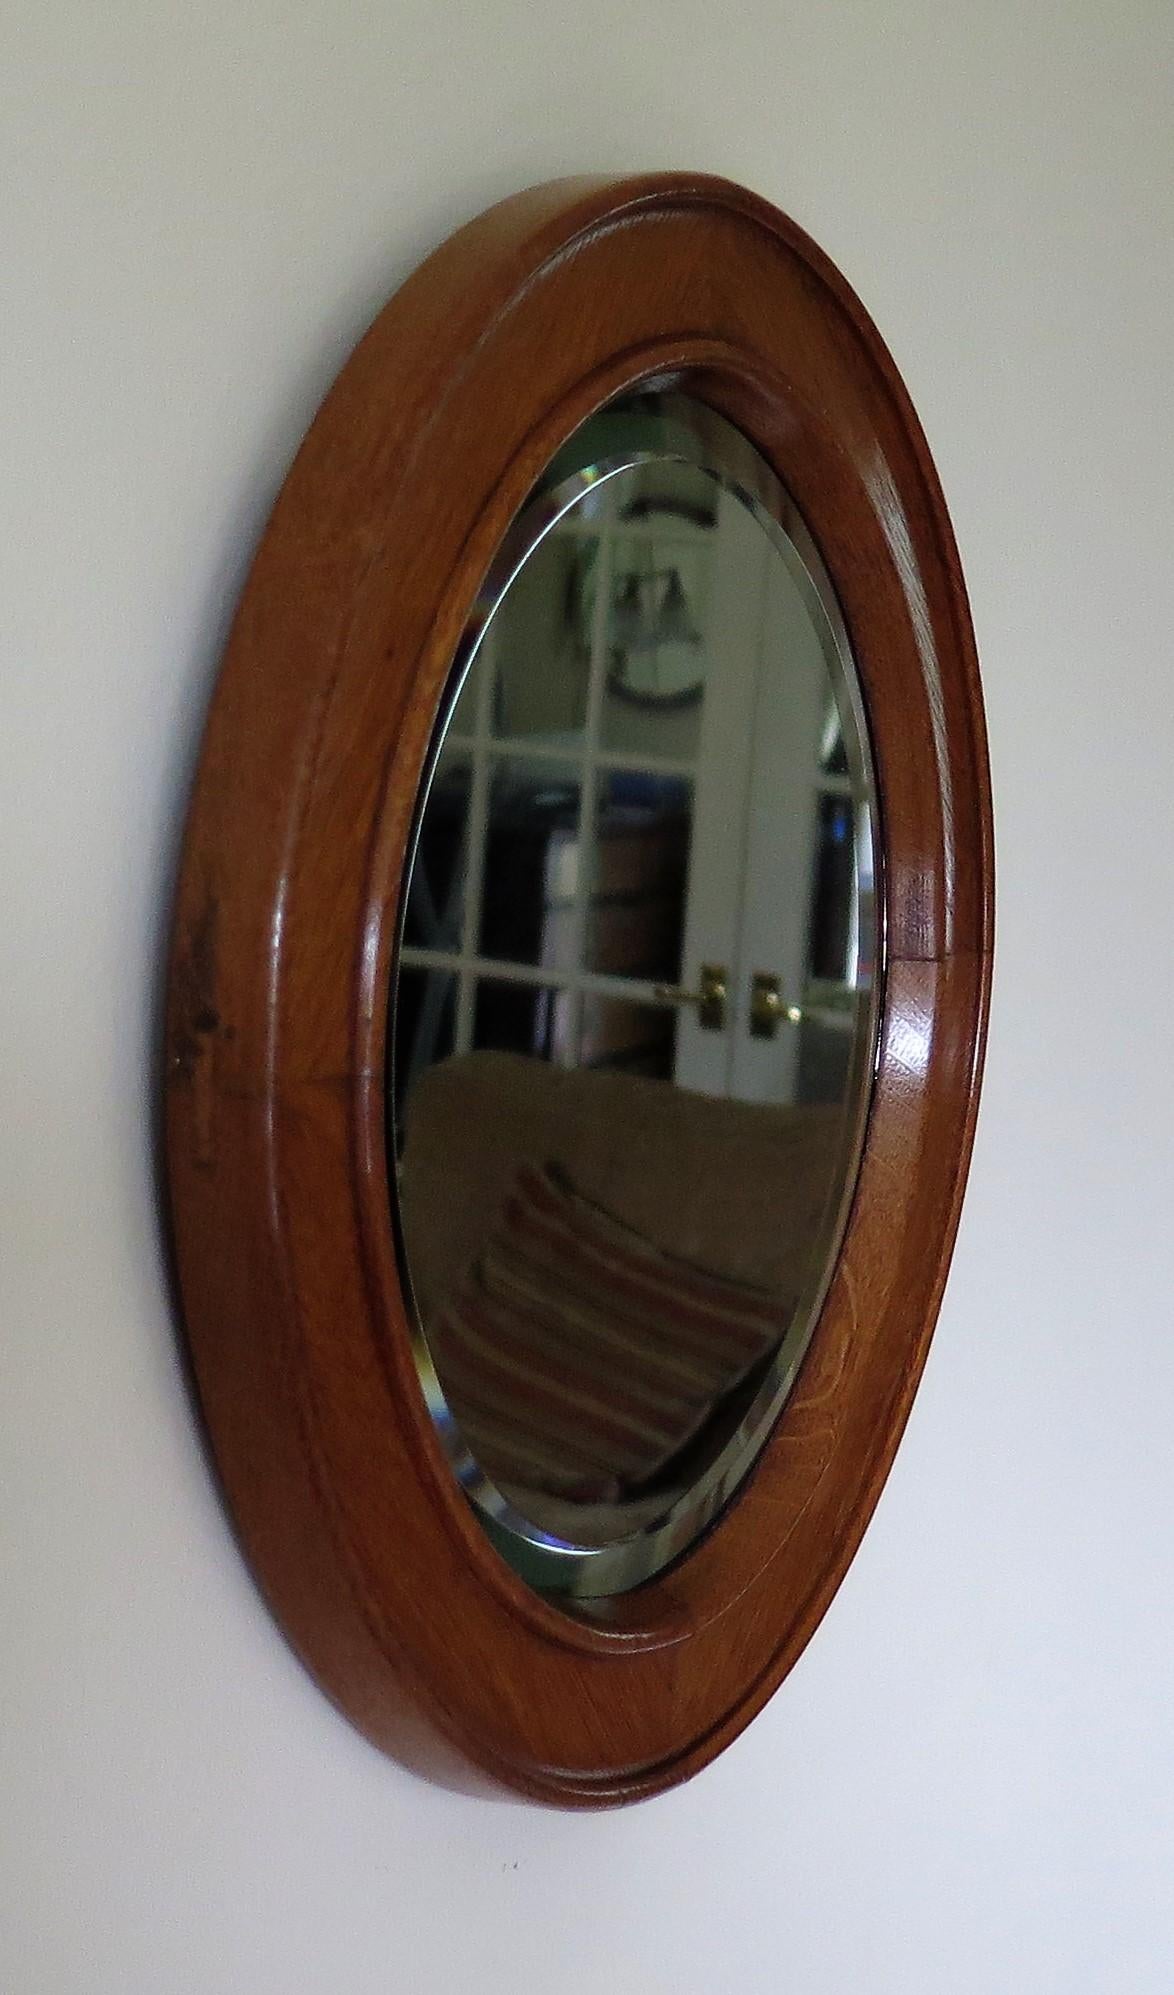 Beveled 19th C. Arts & Crafts Circular Wall Mirror Golden Oak Jointed Frame Bevel Glass